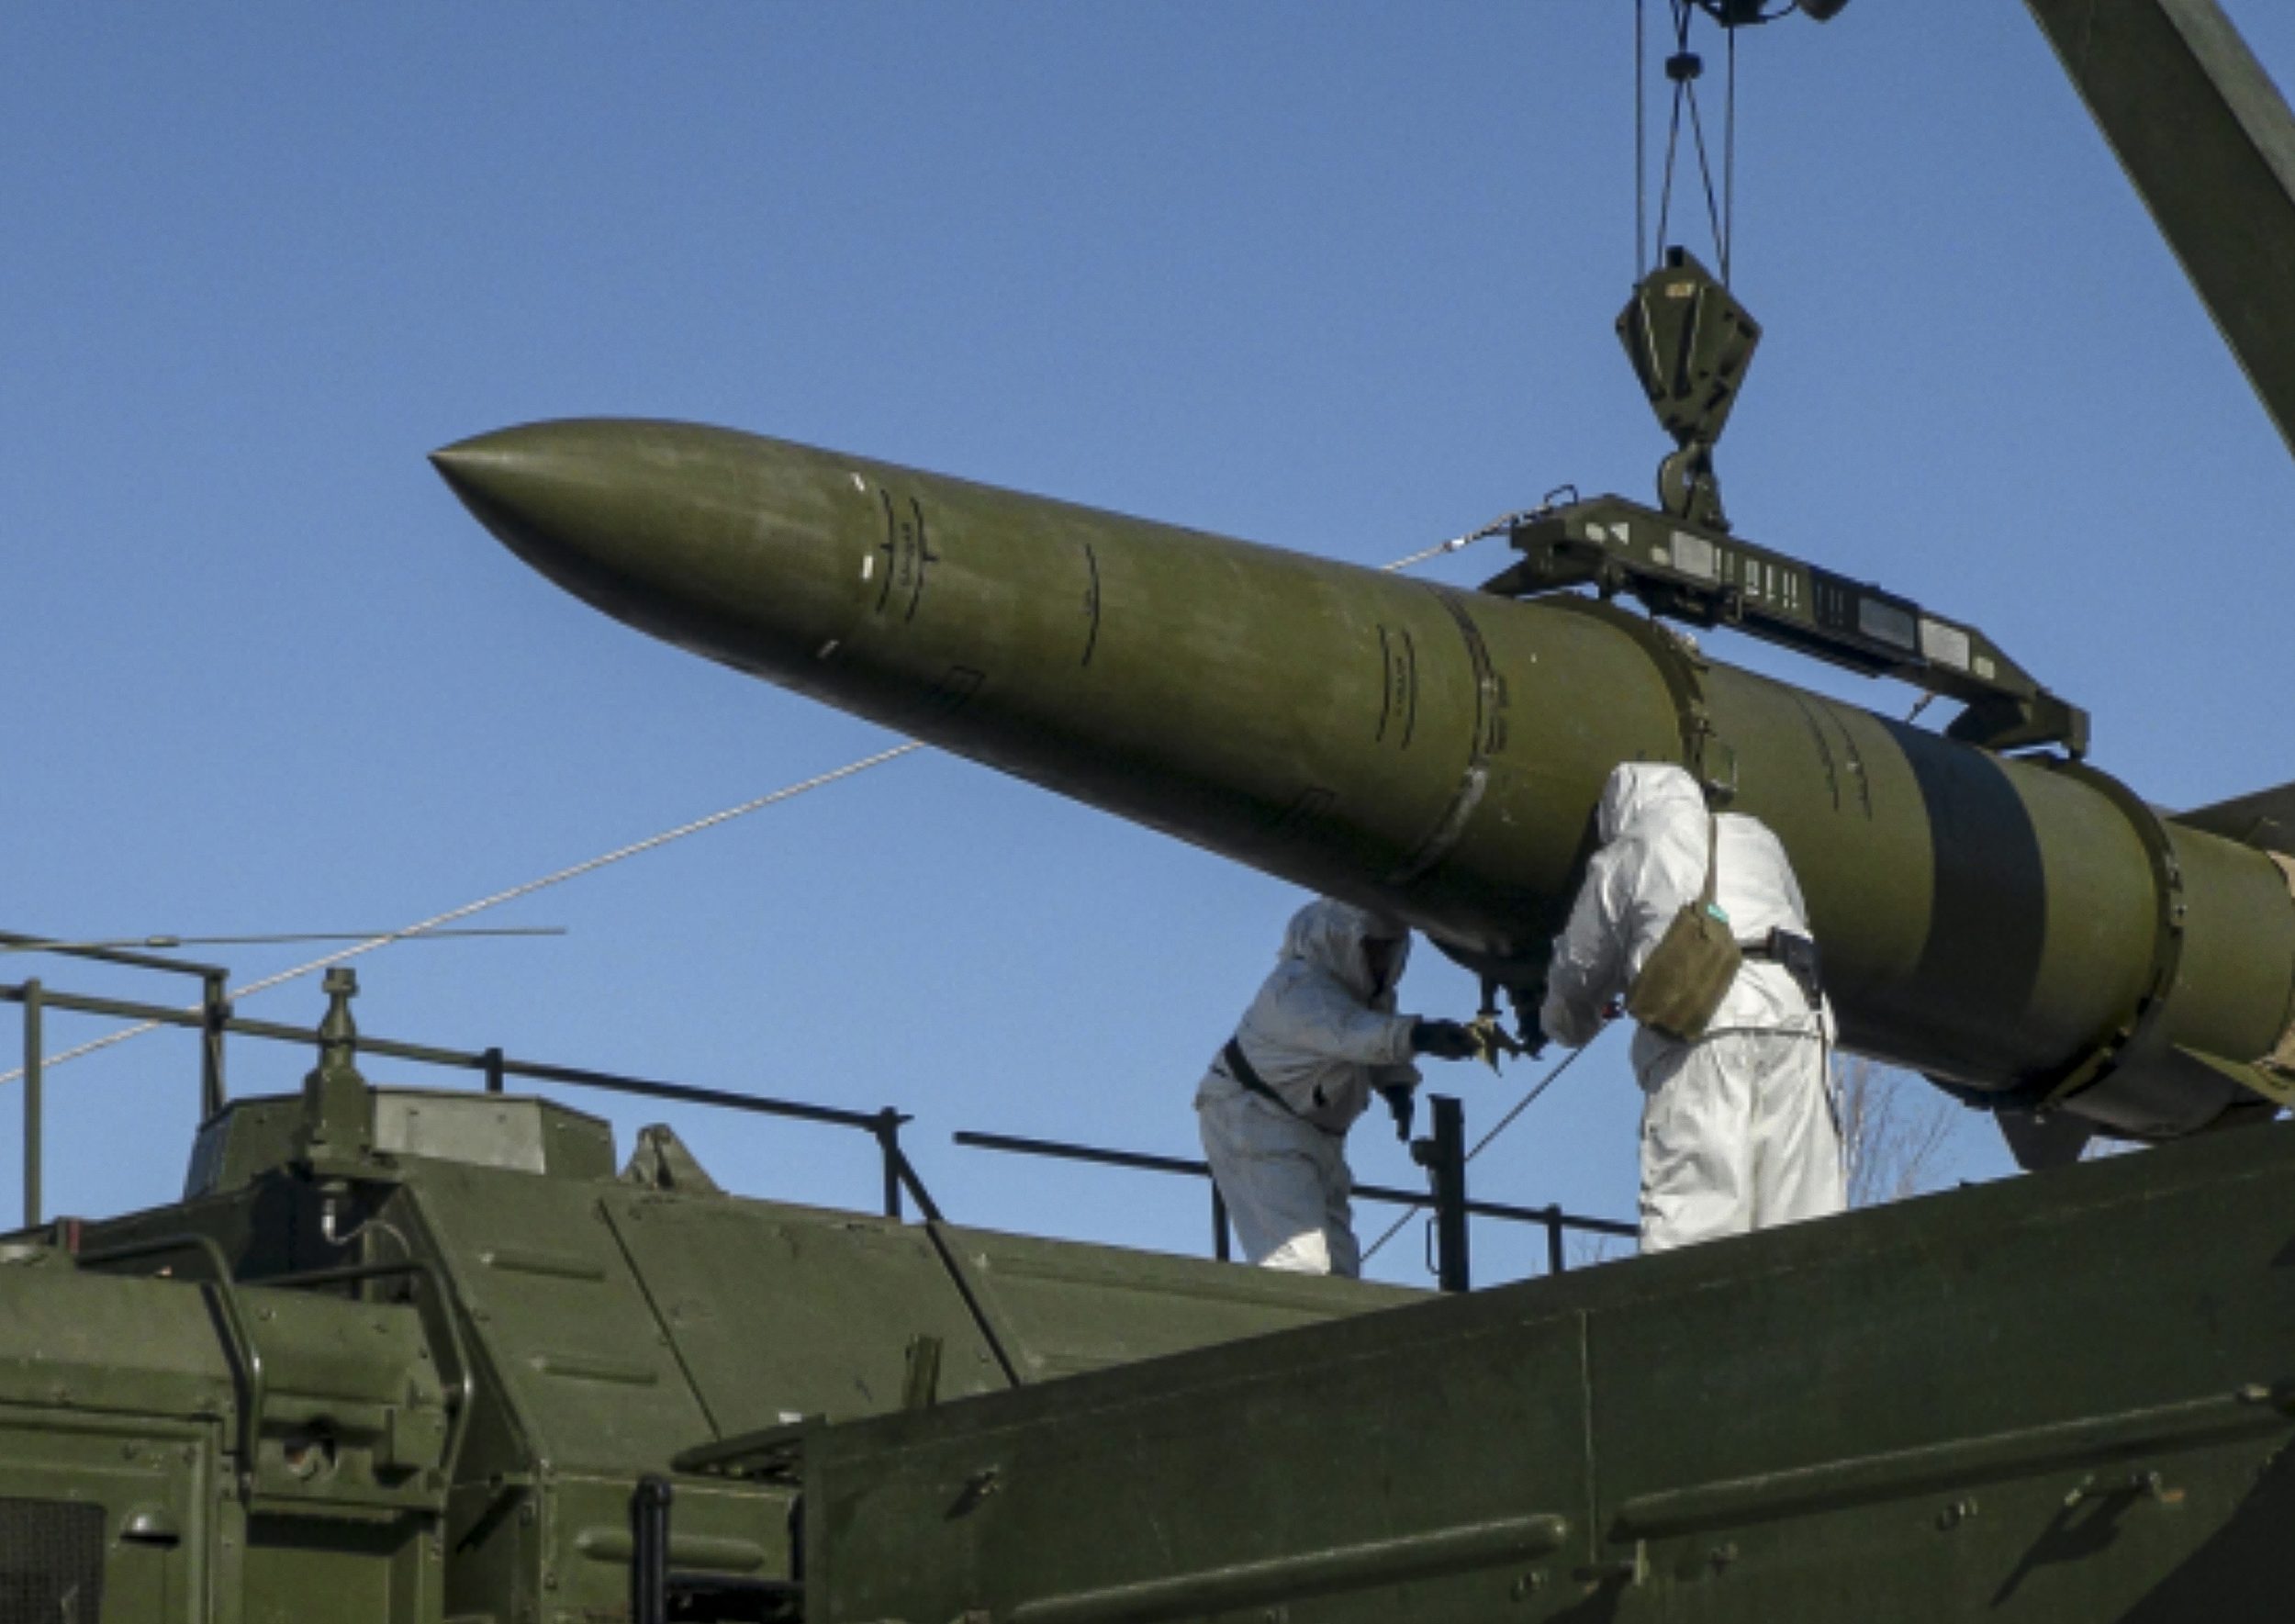 Russia warns of nuclear weapon drills to ‘cool down’ West. Is it
bluffing?